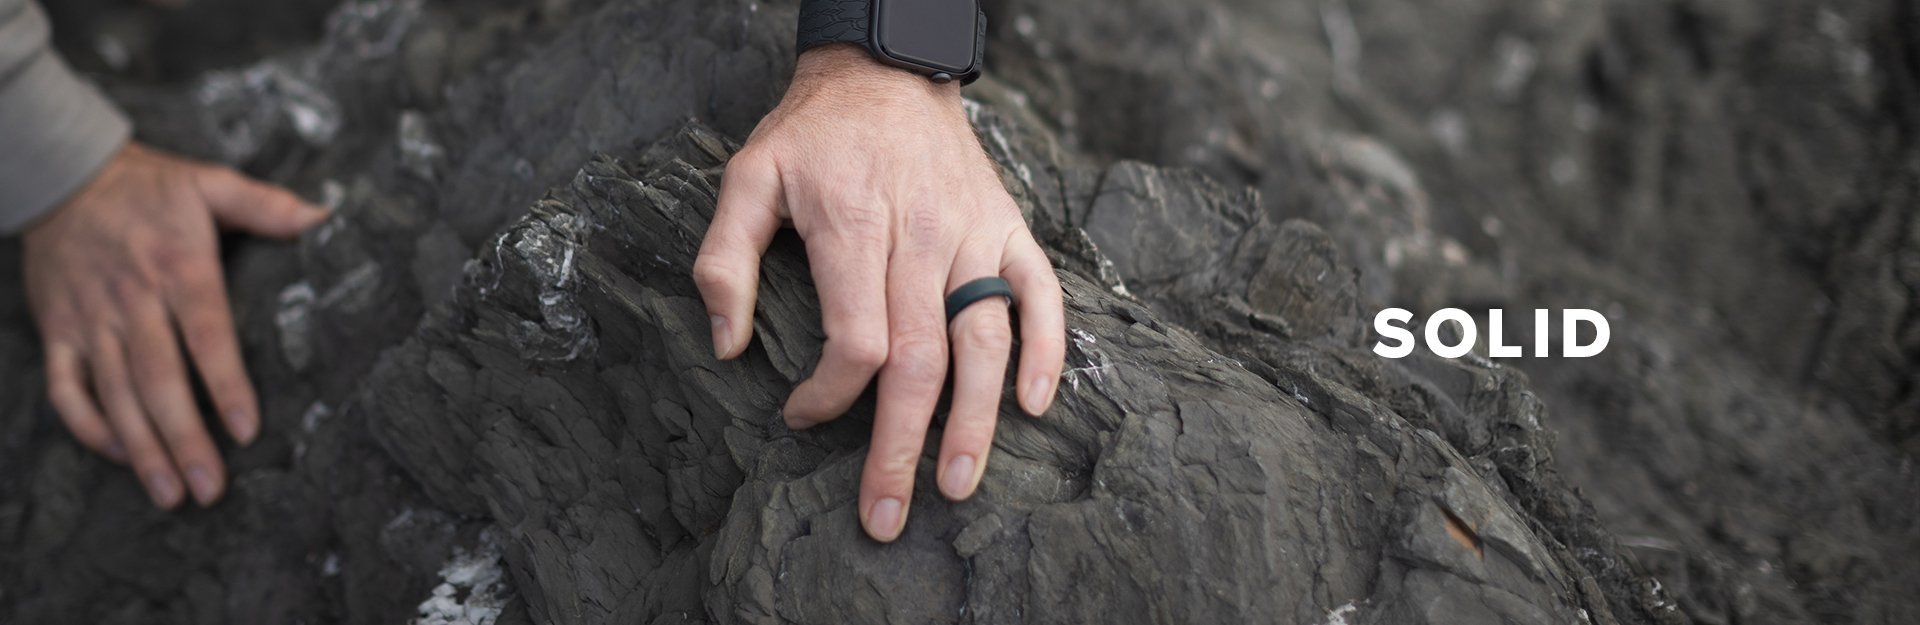 Solid, a man's hand grips a rock and displays his groove ring